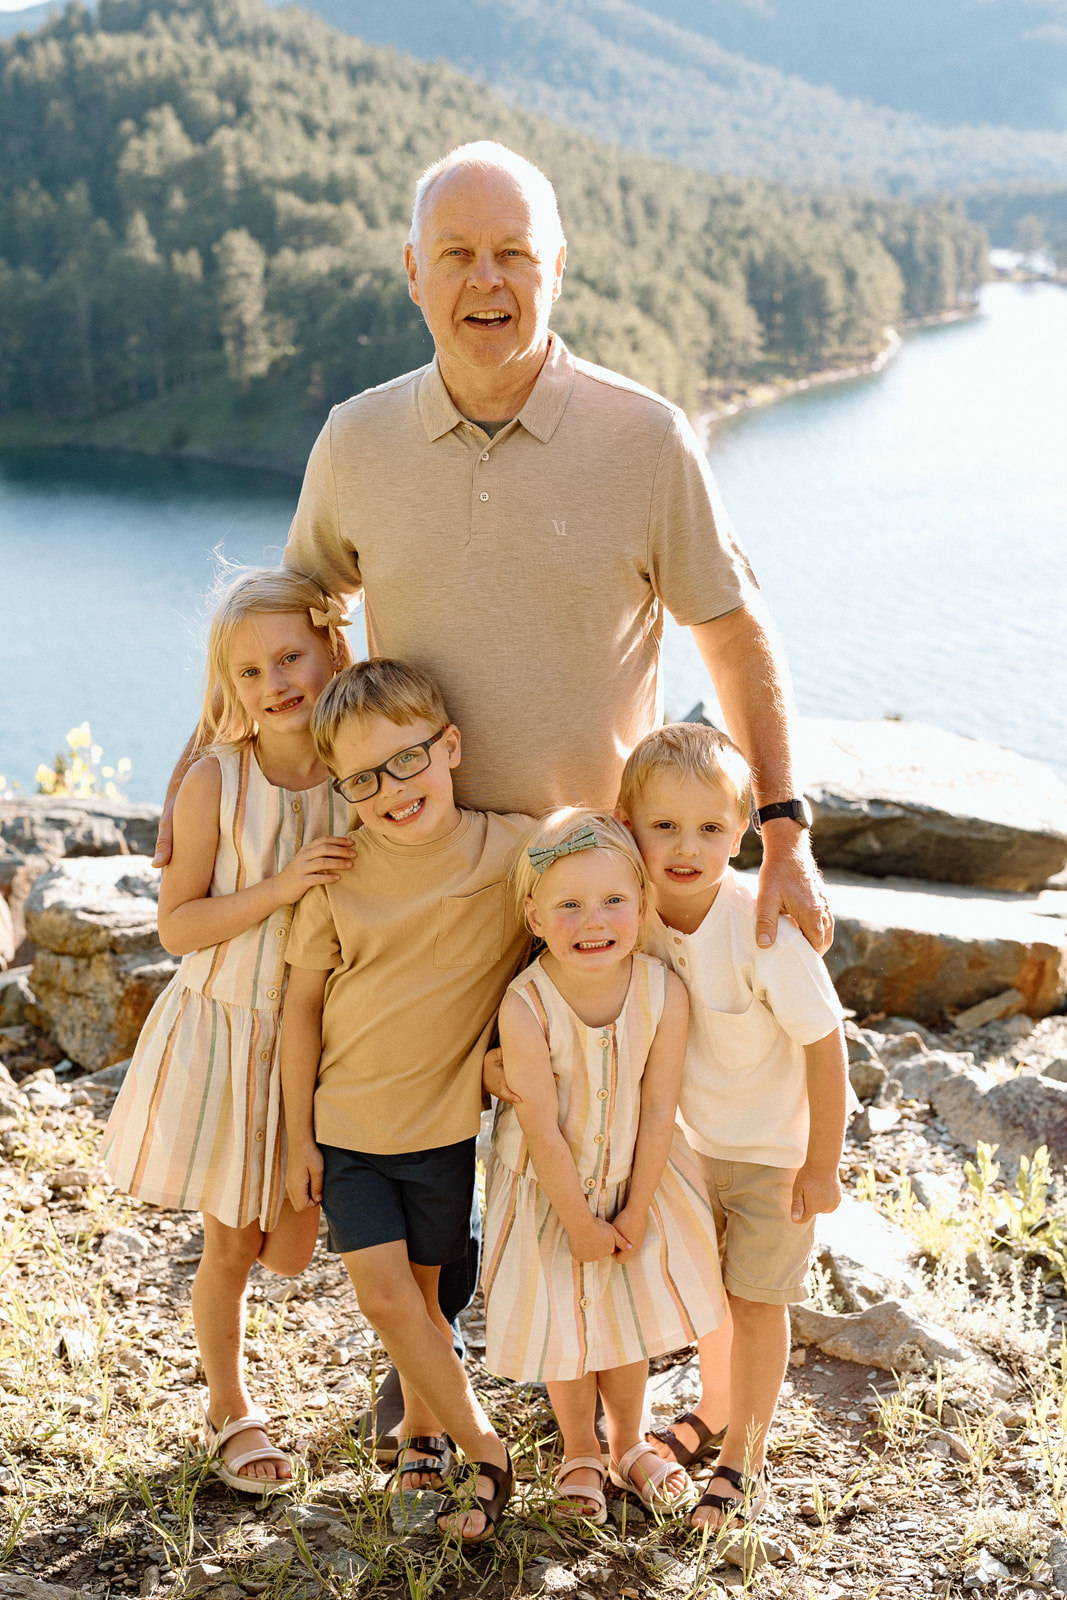 An extended family photo session at Pactola in the Black Hills near Rapid City, SD